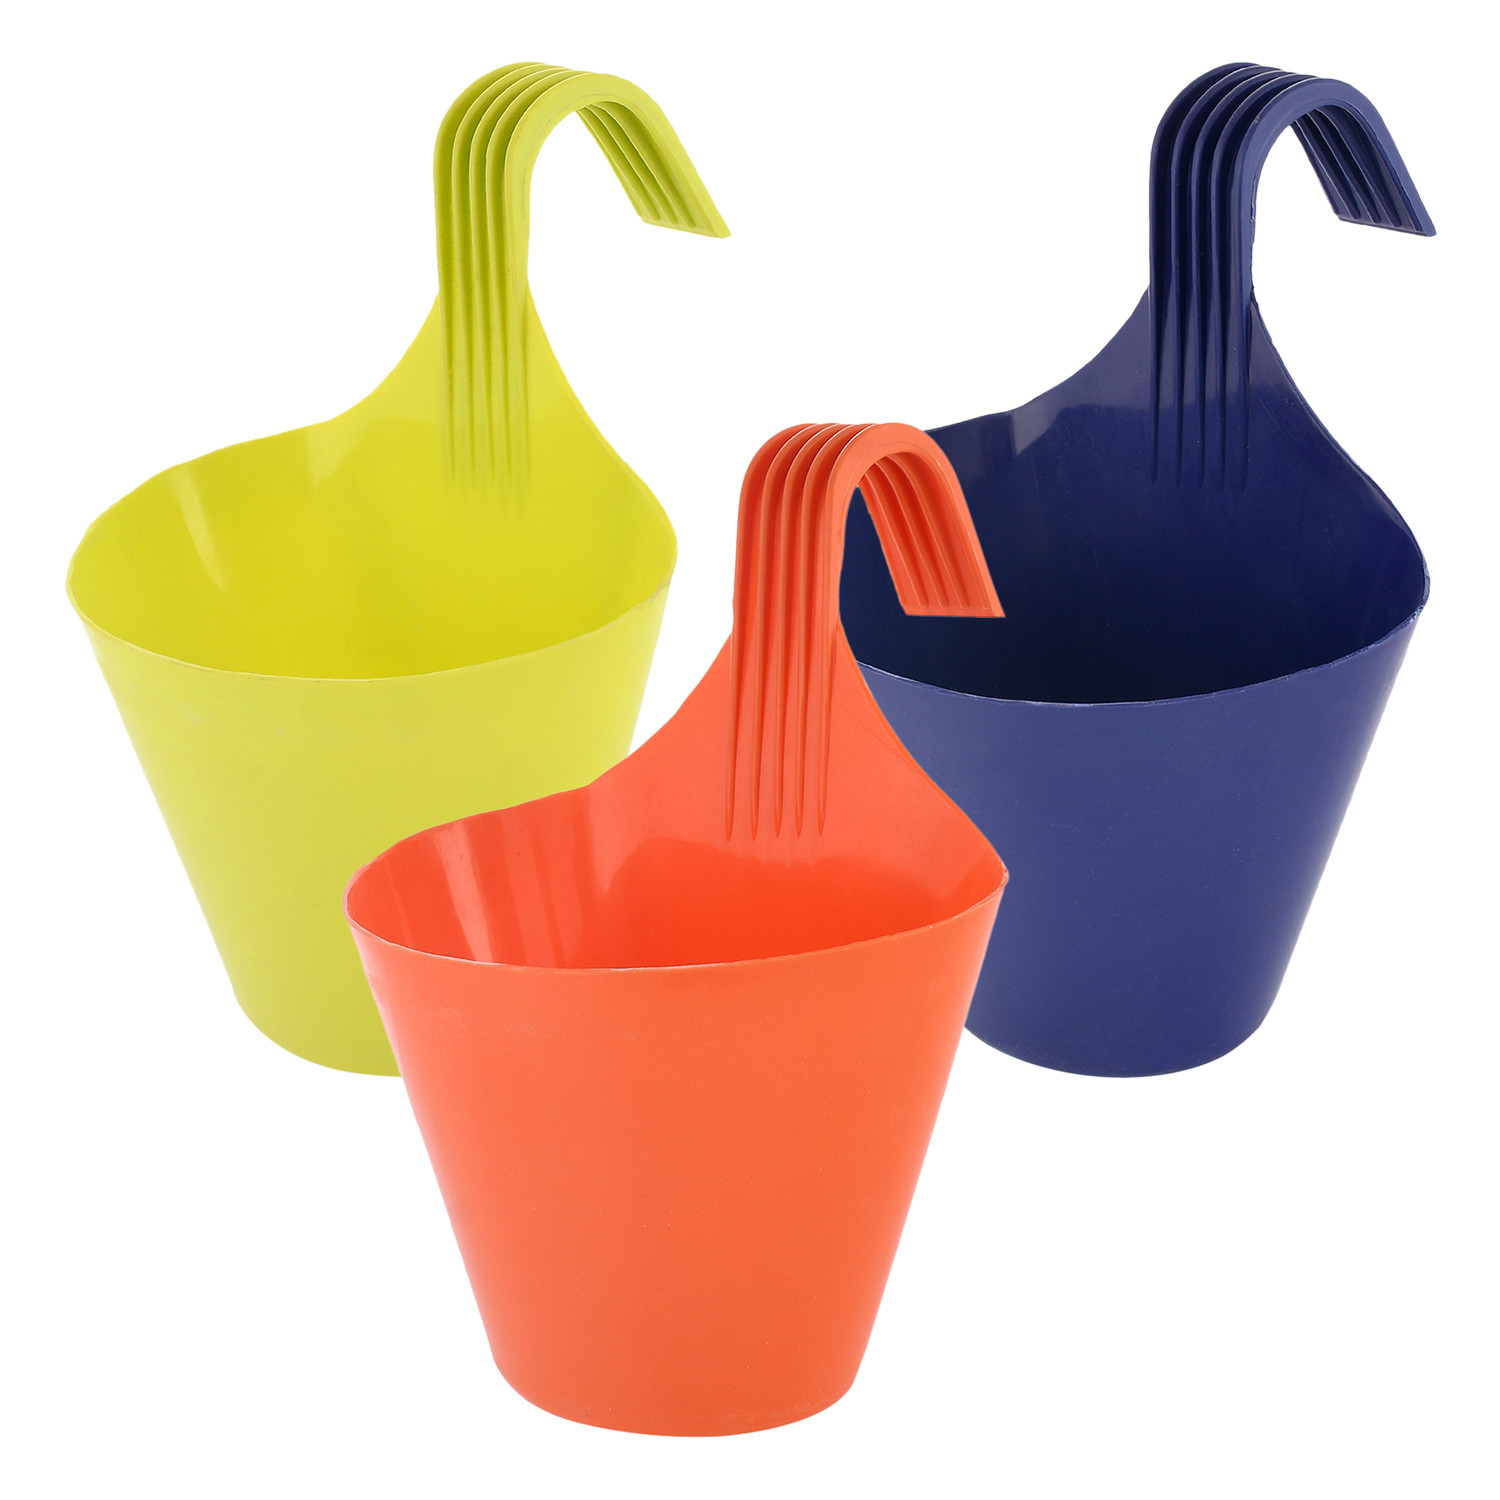 Kuber Industries Hanging Flower Pot|Single Hook Plant Container|Durable Plastic Glossy Finish Pots for Home|Balcony|Garden|9 Inch|Pack of 3 (Multicolor)